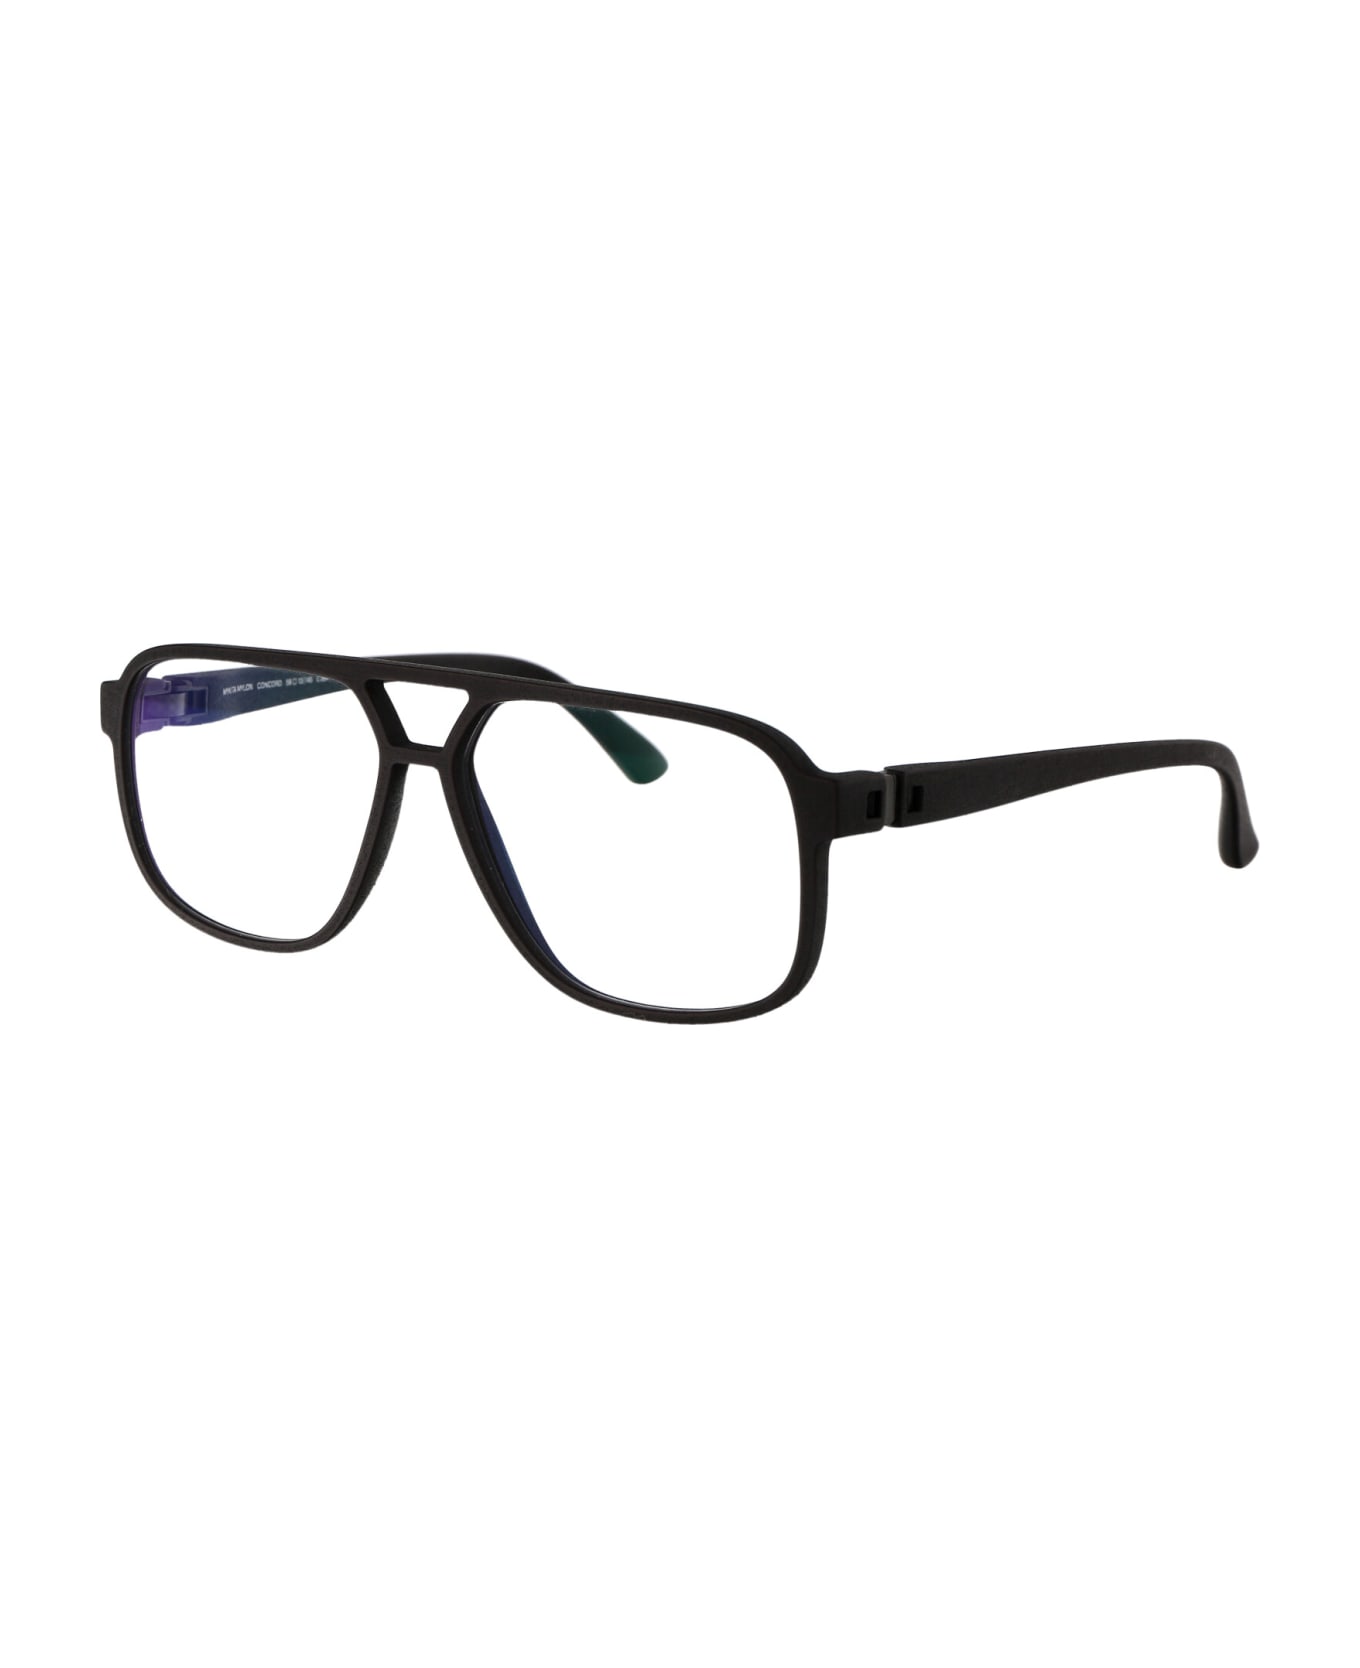 Mykita Concord Glasses - 354 MD1 PITCH BLACK Clear